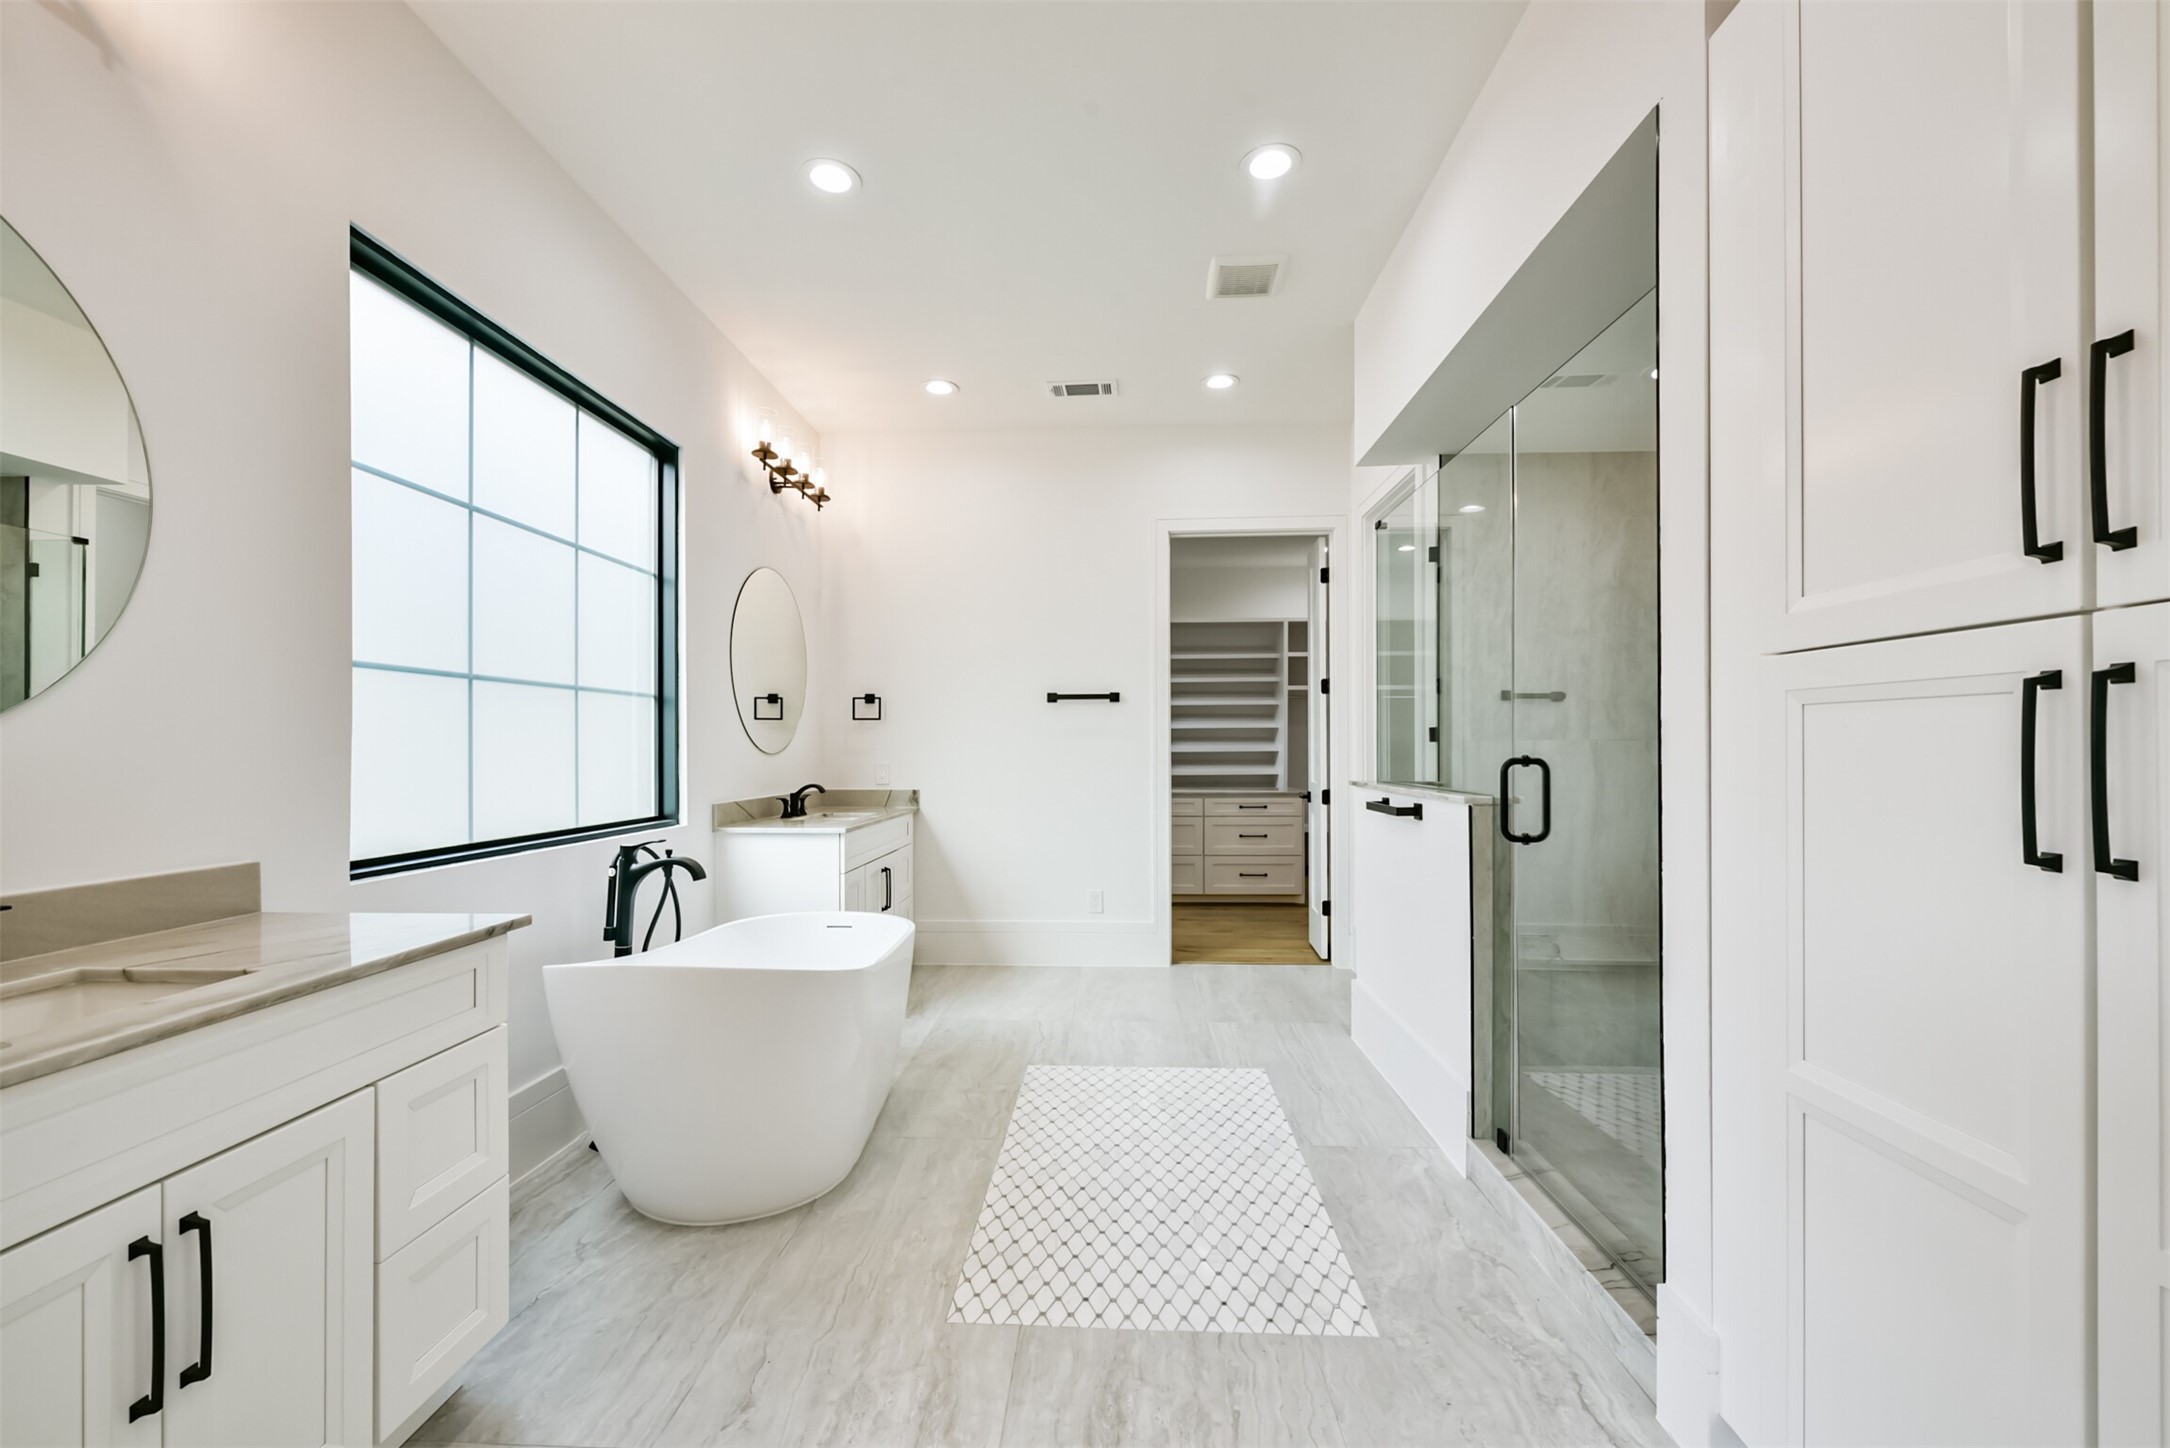 Primary Bathroom featuring His and Hers Sink Areas, Frameless Shower, Freestanding Bathtub and more!